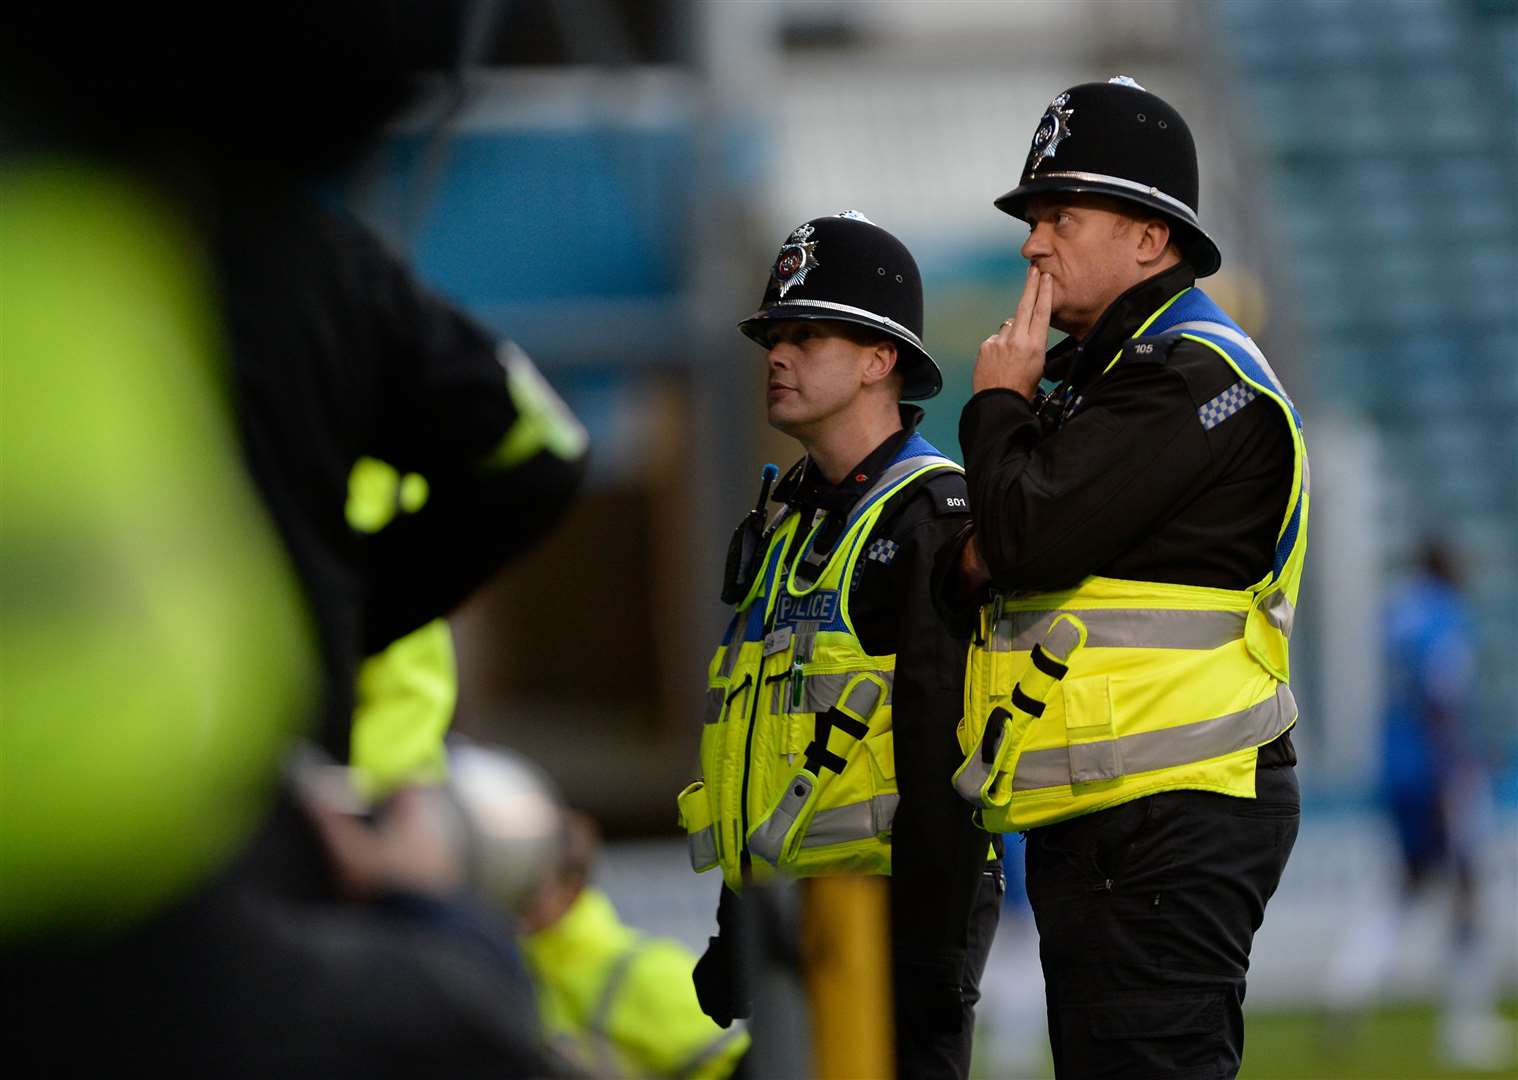 Police are investigating footage of crowd trouble at Gillingham